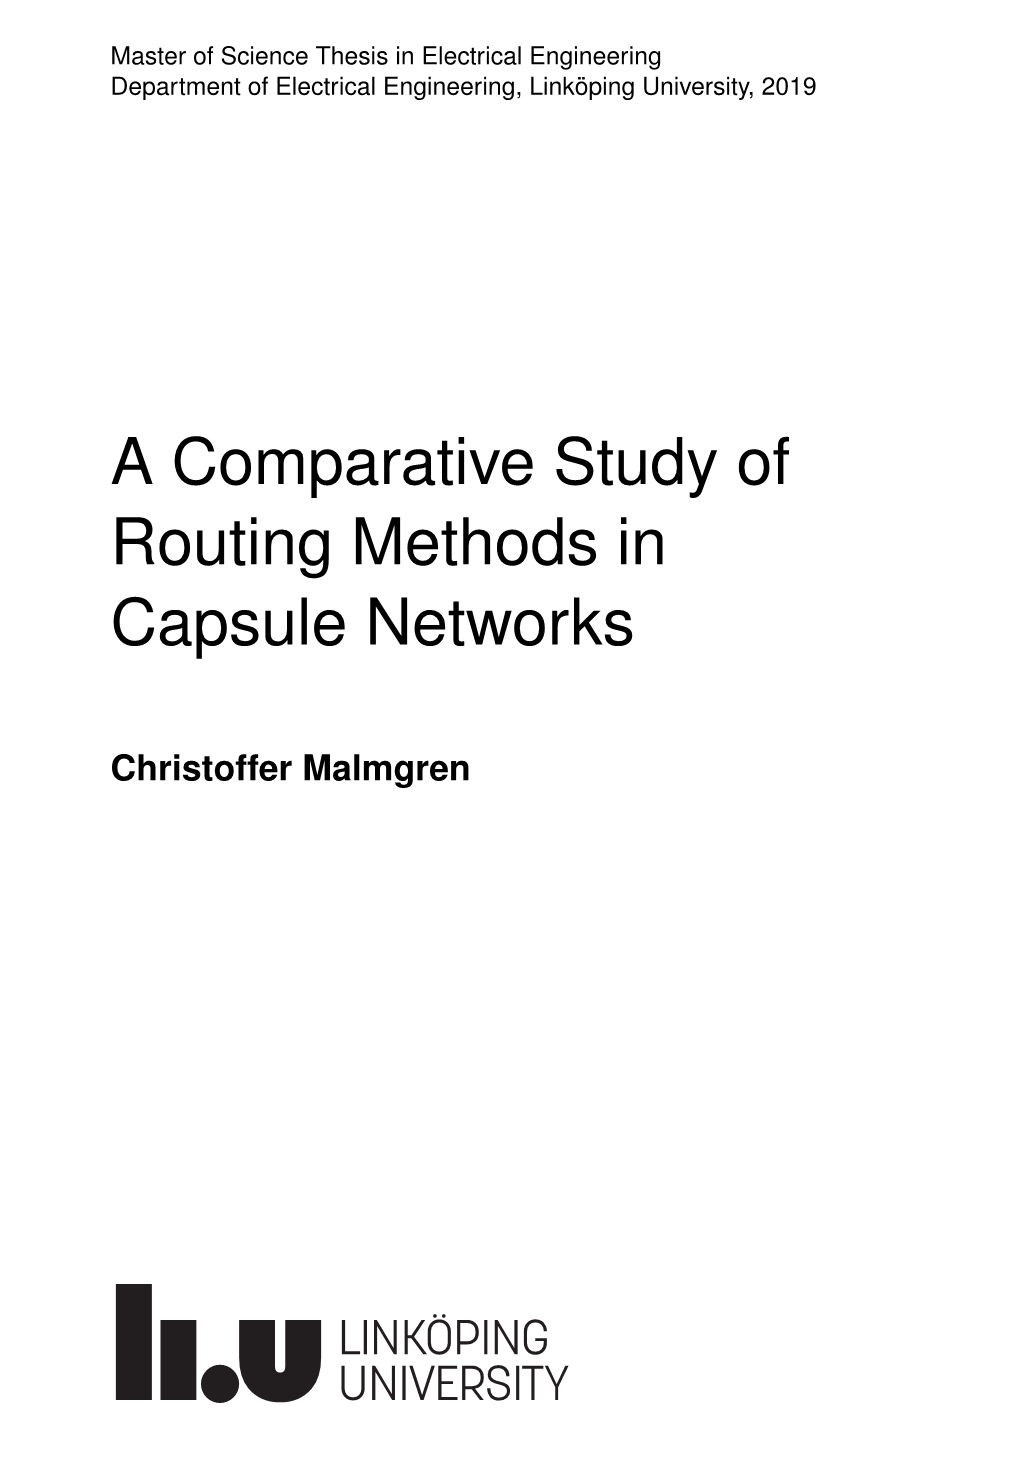 A Comparative Study of Routing Methods in Capsule Networks